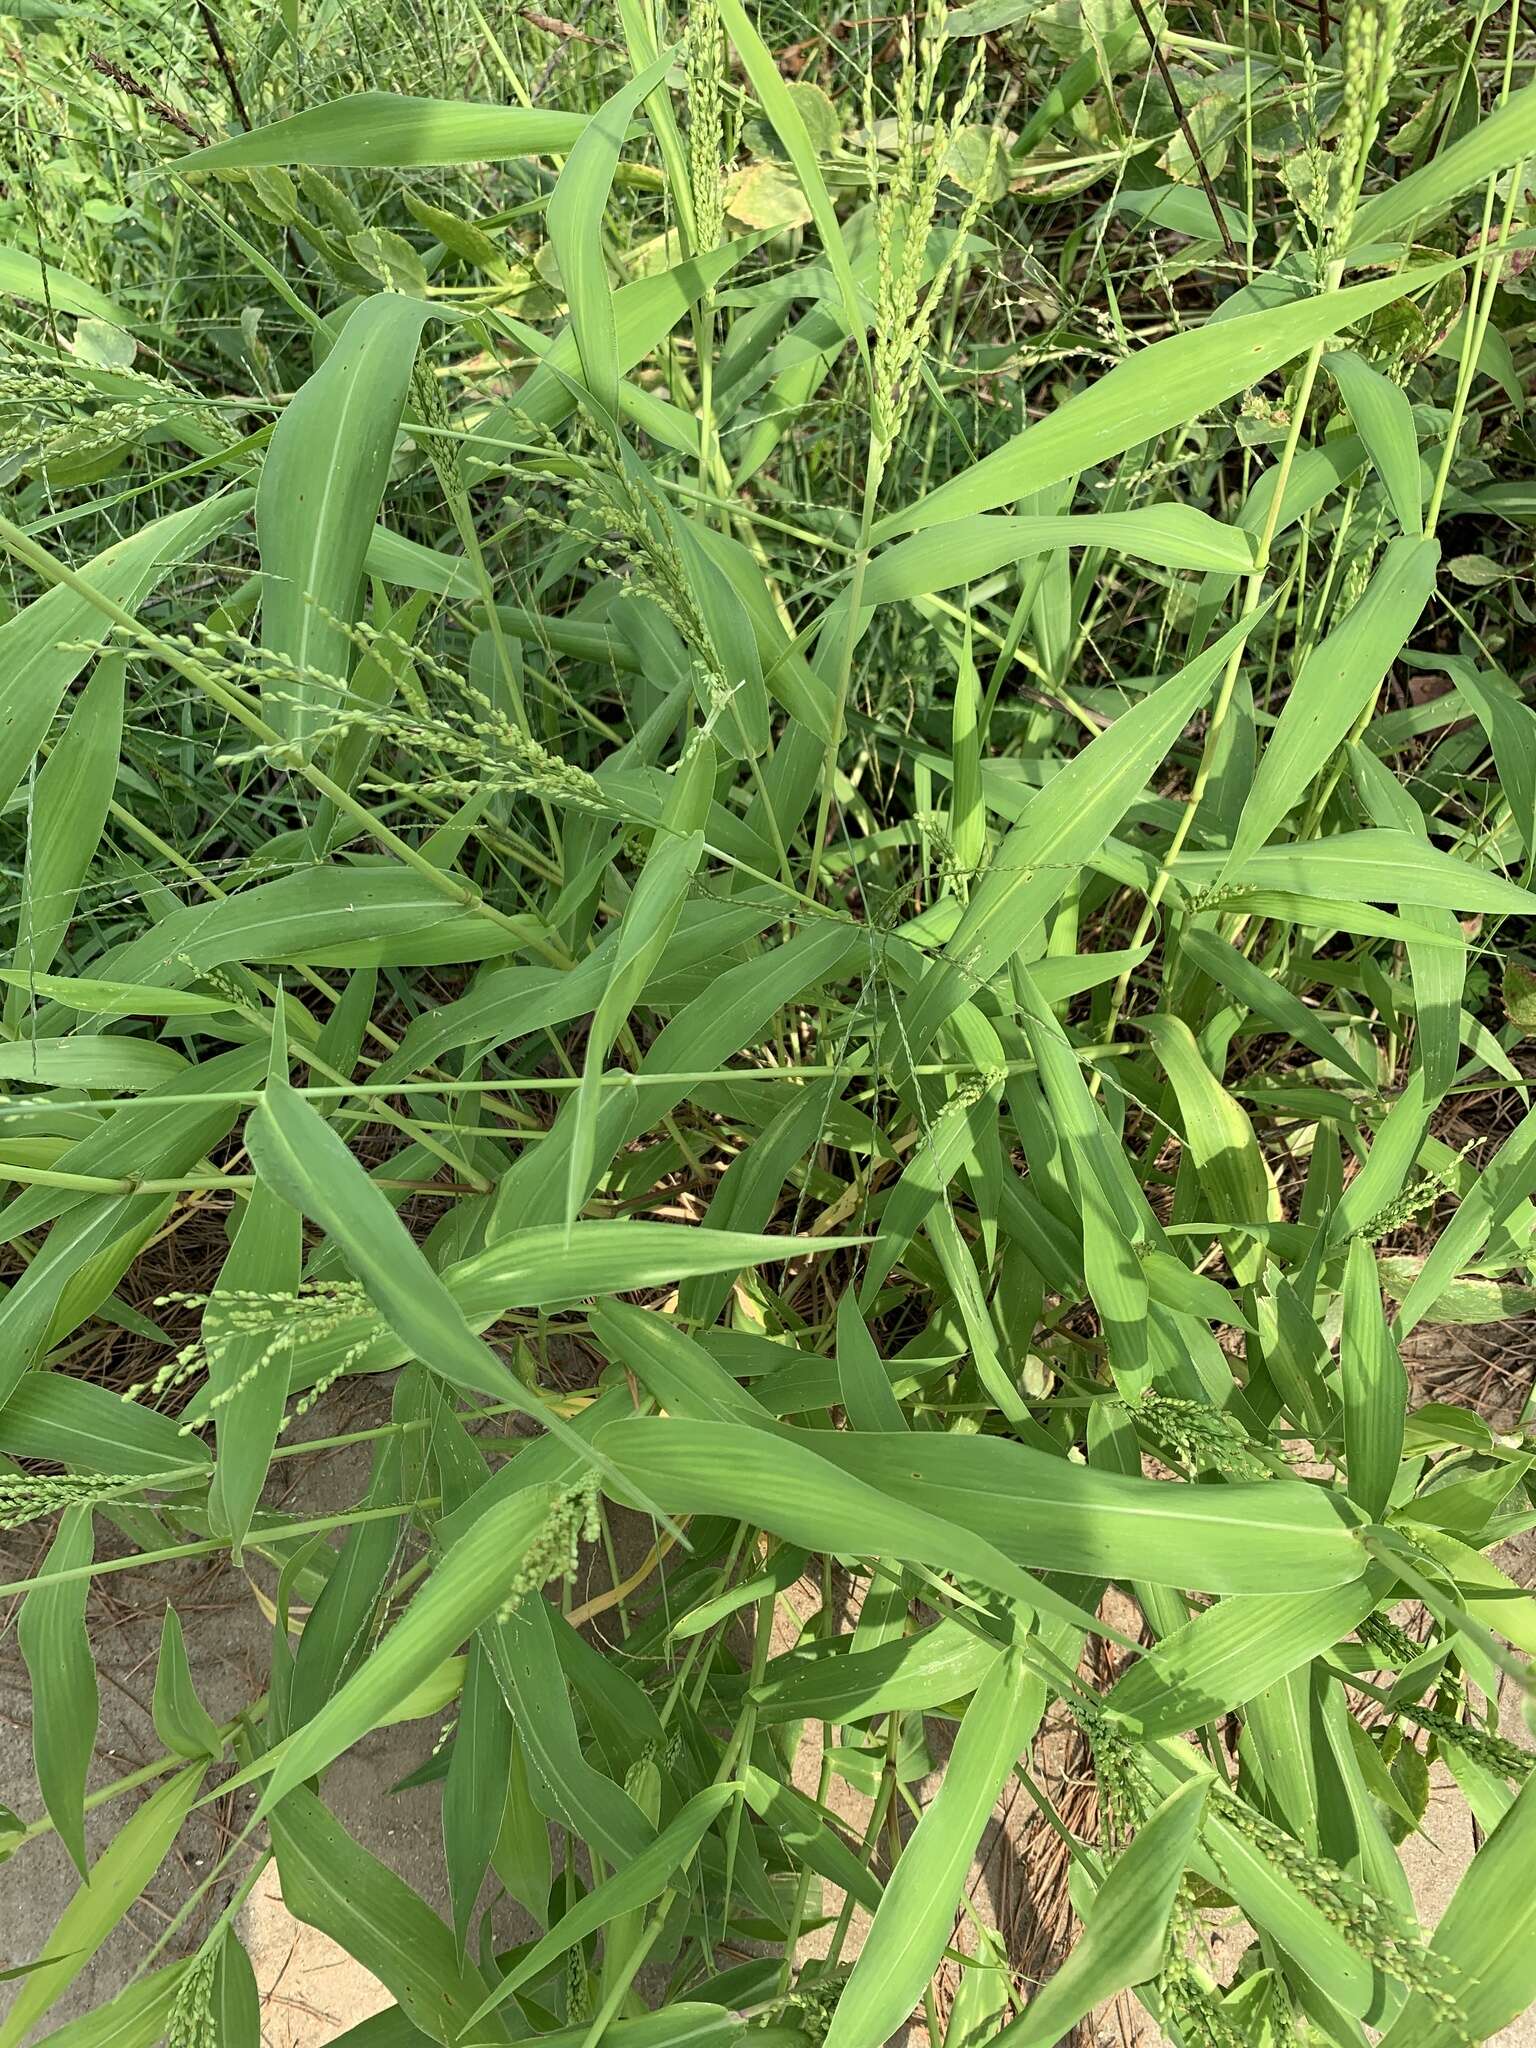 Image of Dixie Liverseed Grass